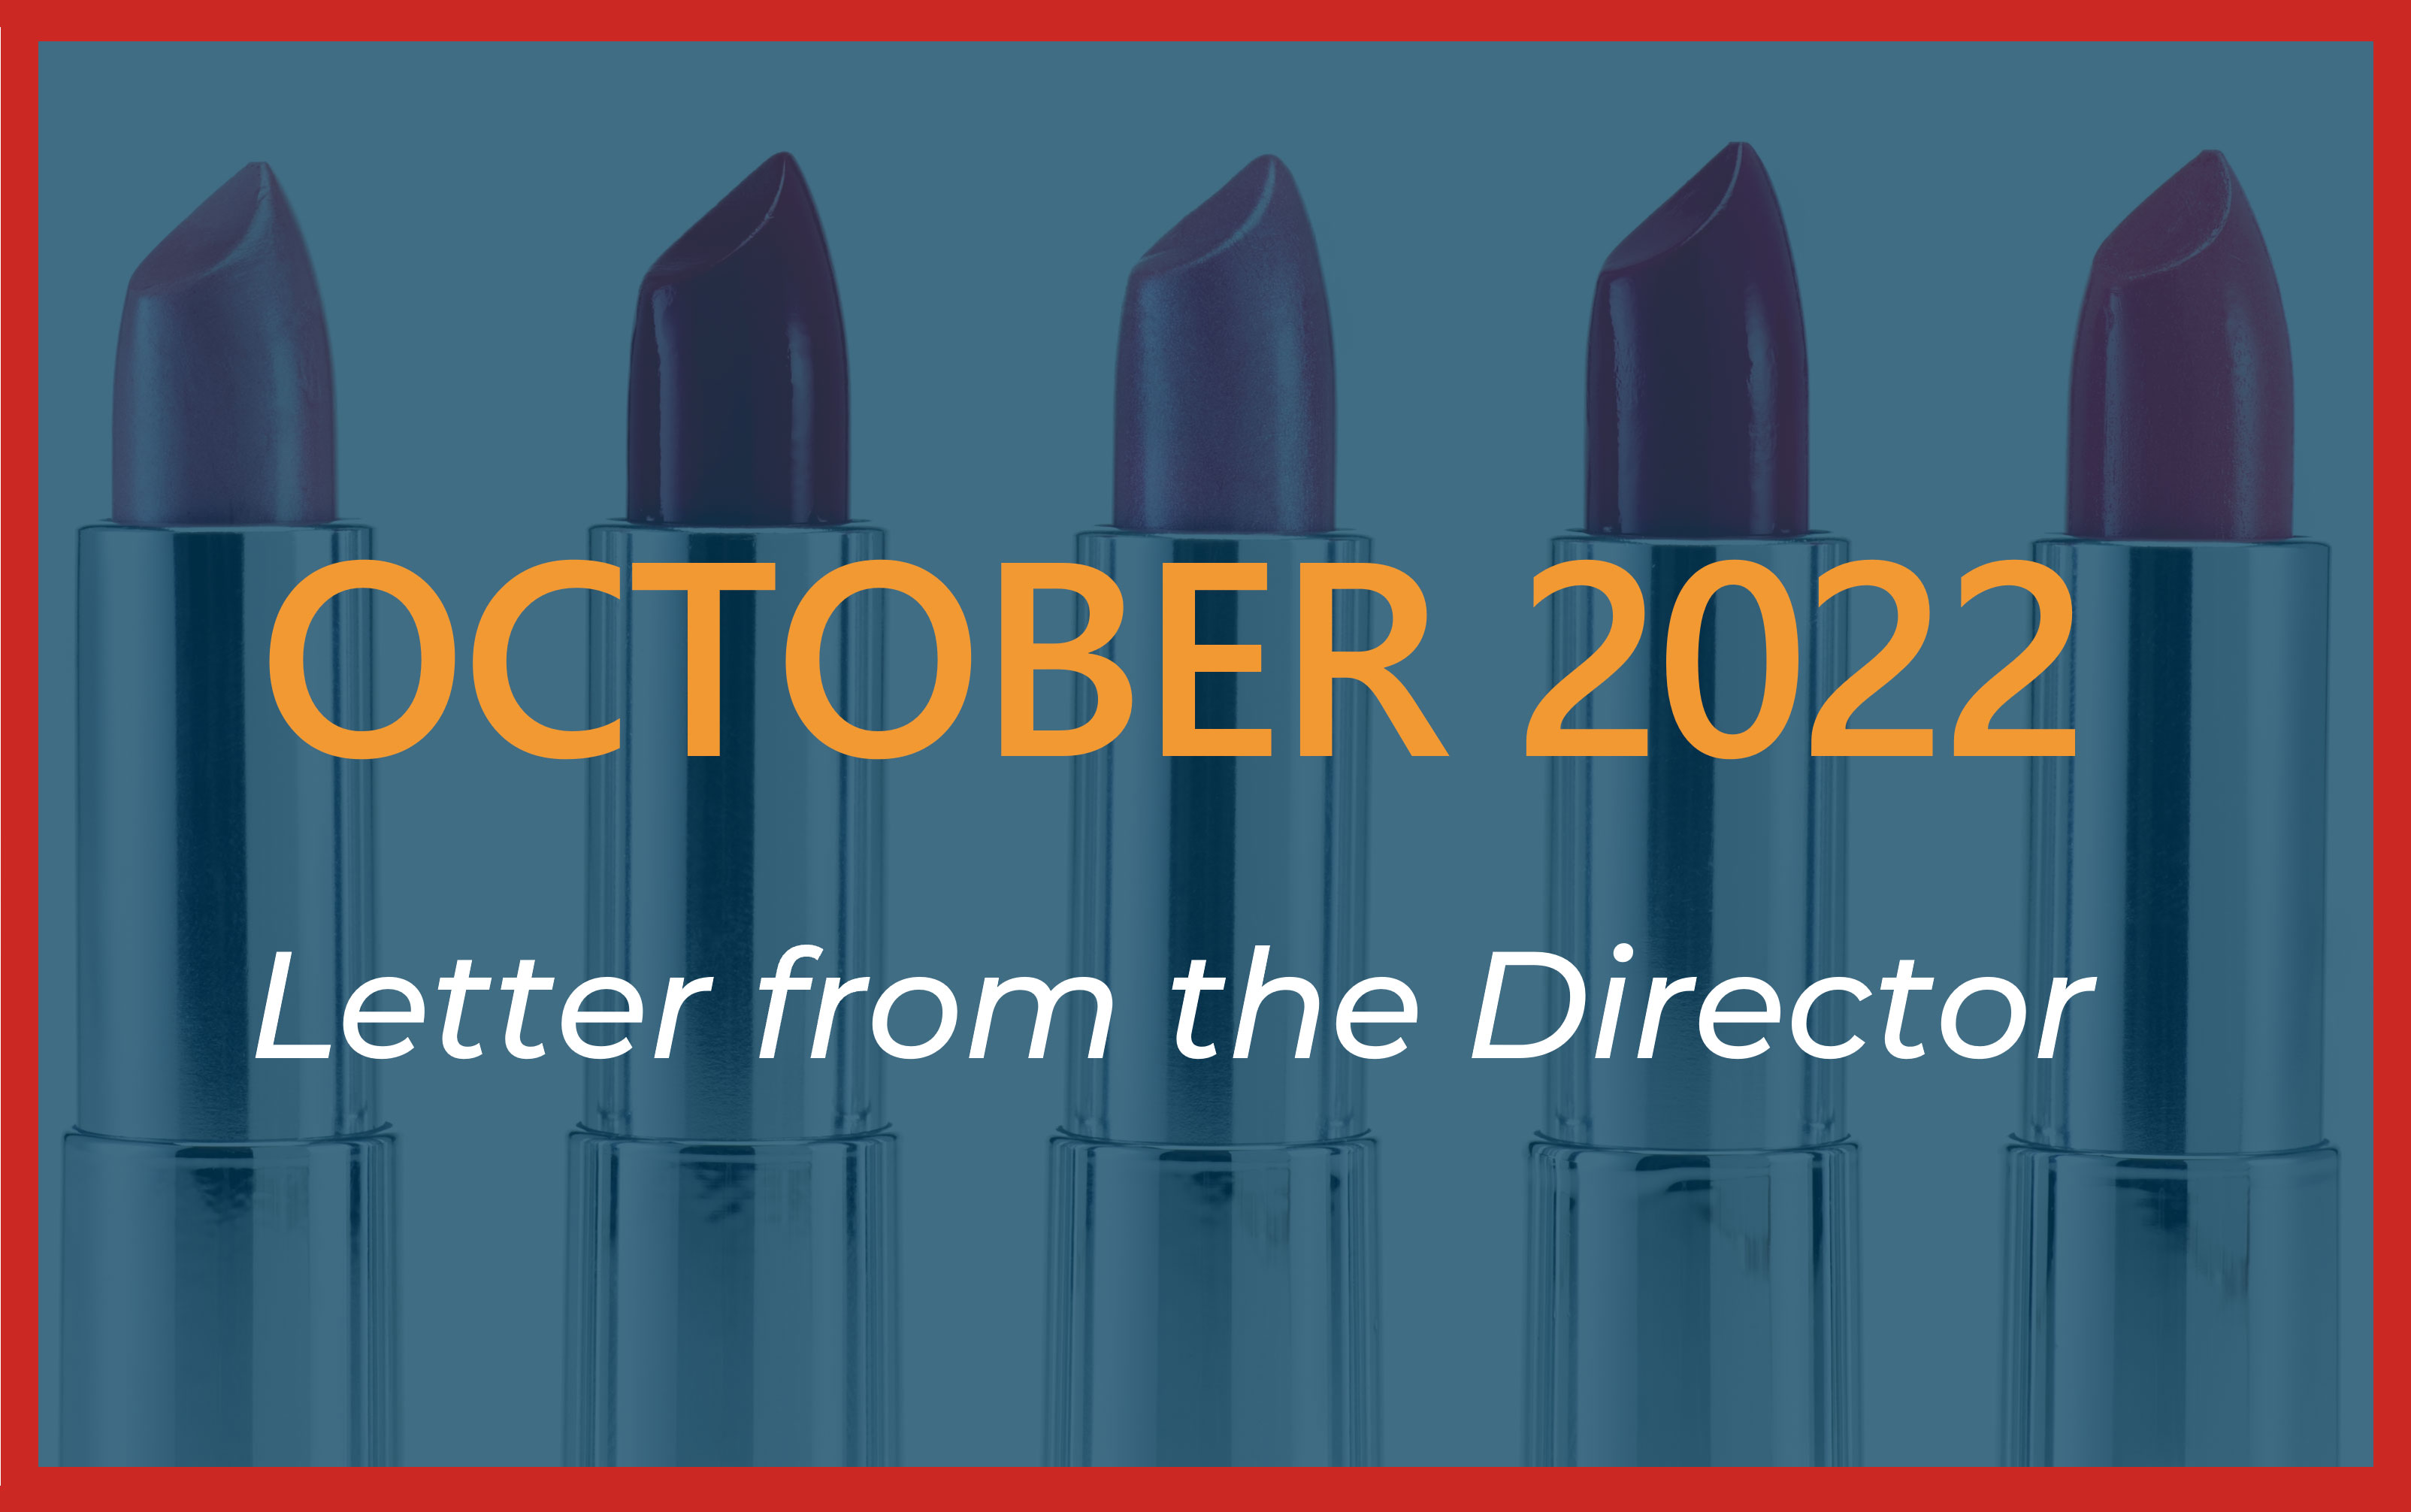 October 2022 - Letter from the Director